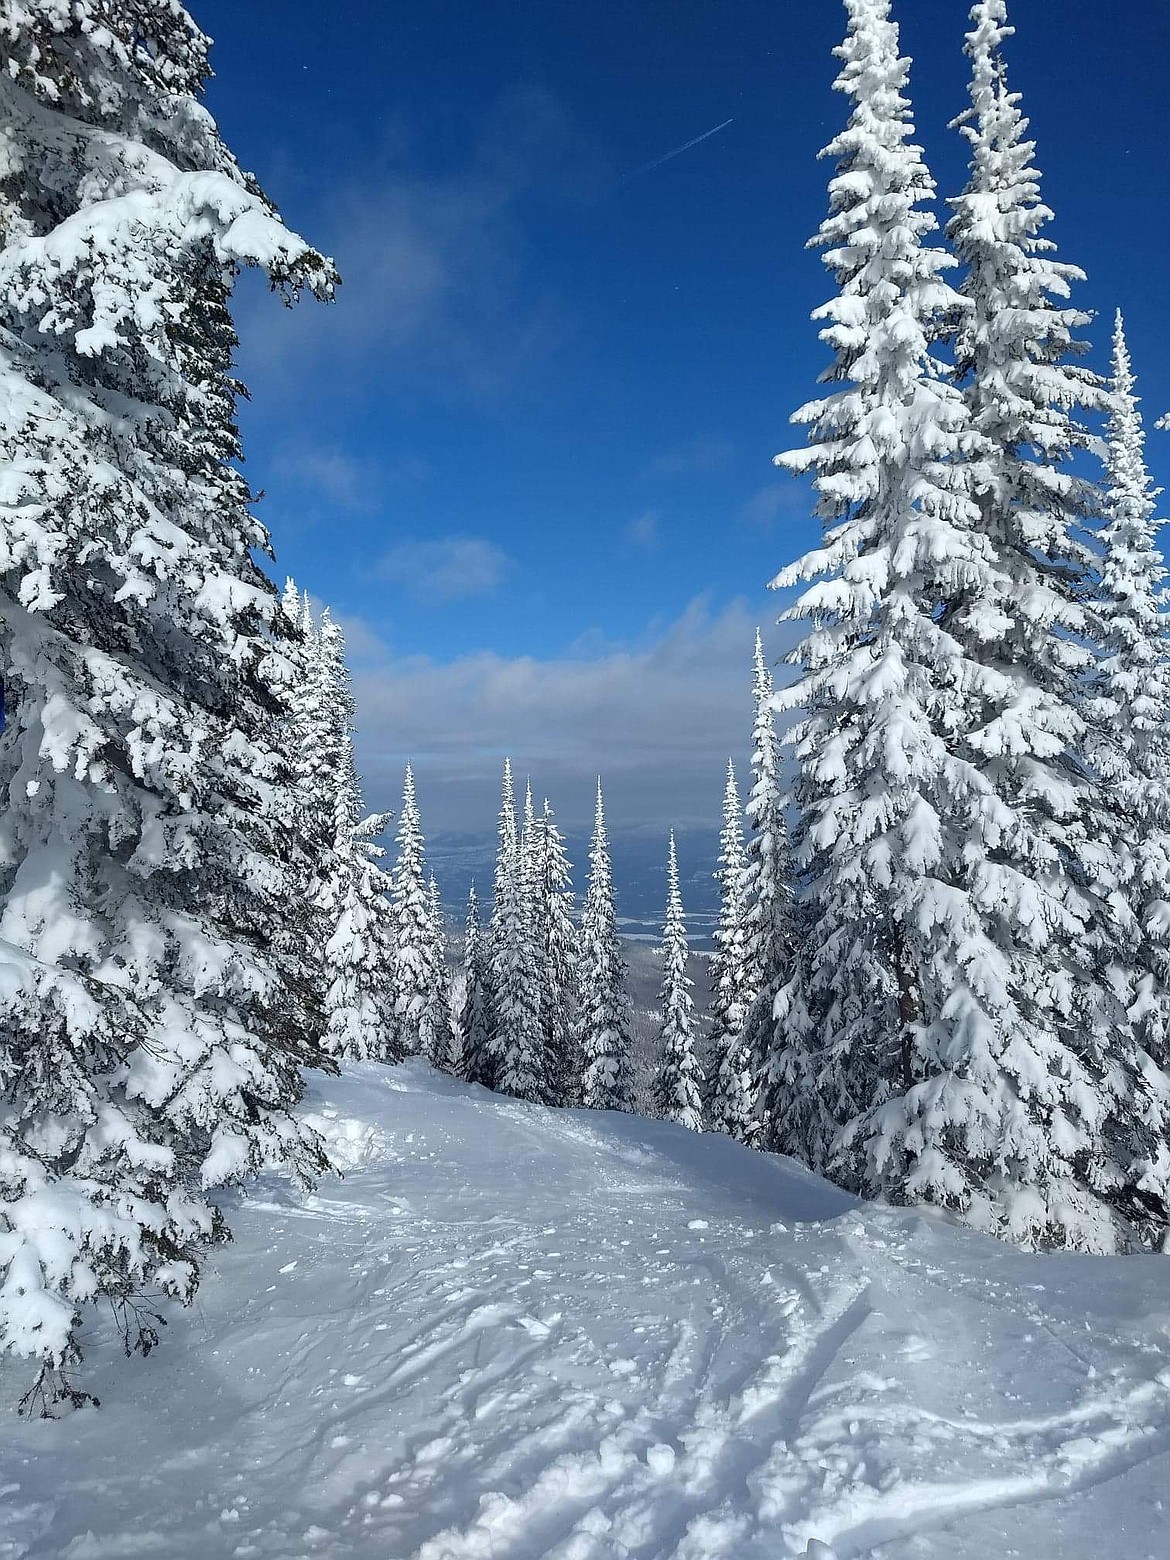 Photo by JOE WARD 
The avalanche fatality numbers for 2020 have placed Idaho and Montana in the lead for avalanche deaths to date.